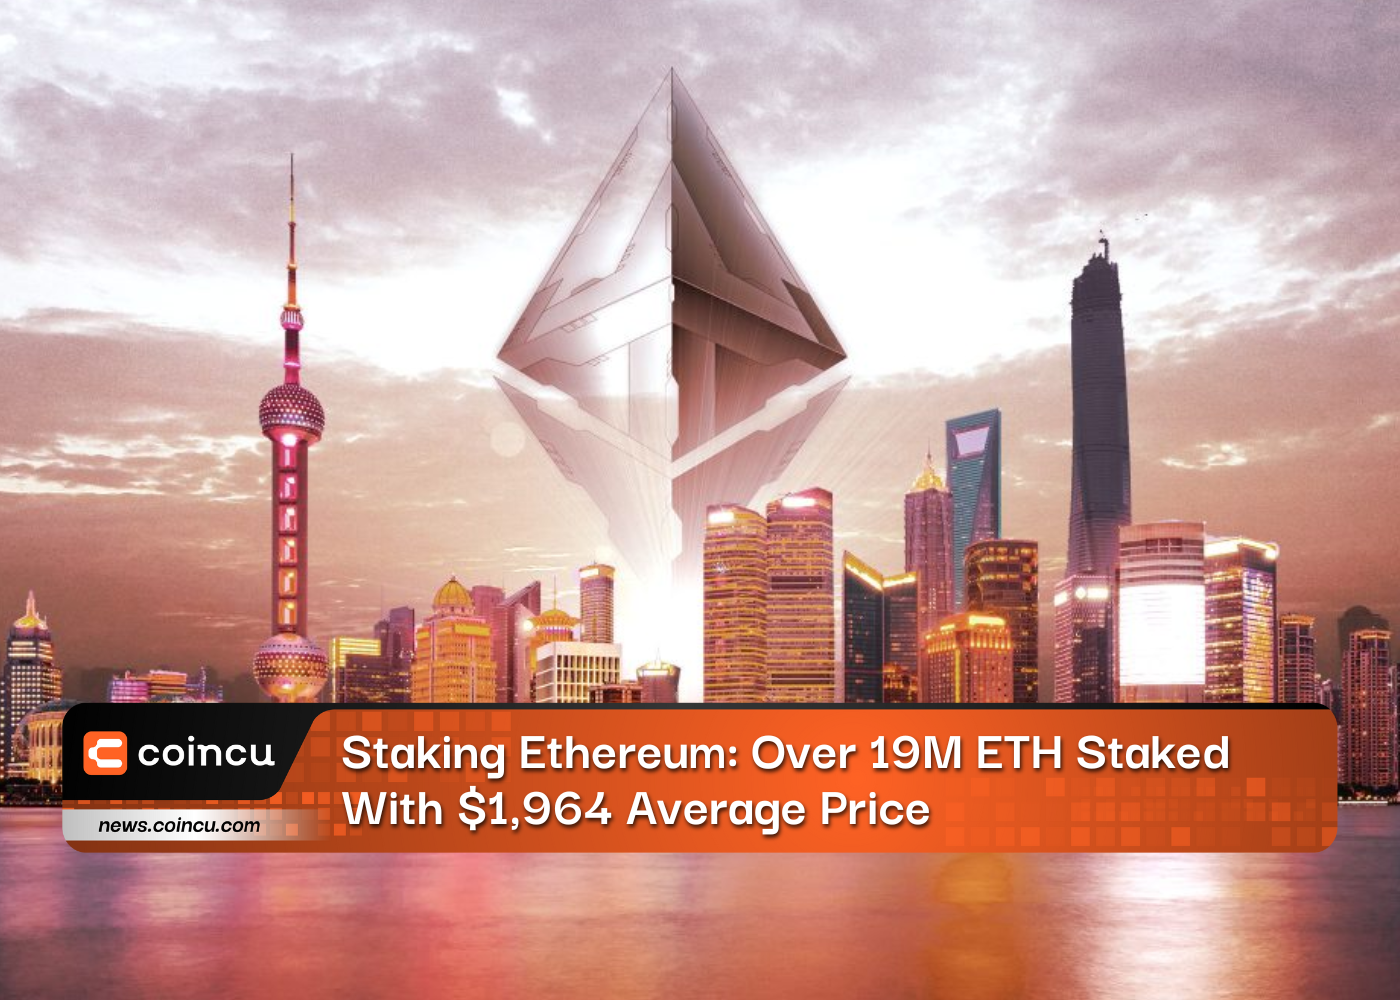 Staking Ethereum: Over 19M ETH Staked With $1,964 Average Price